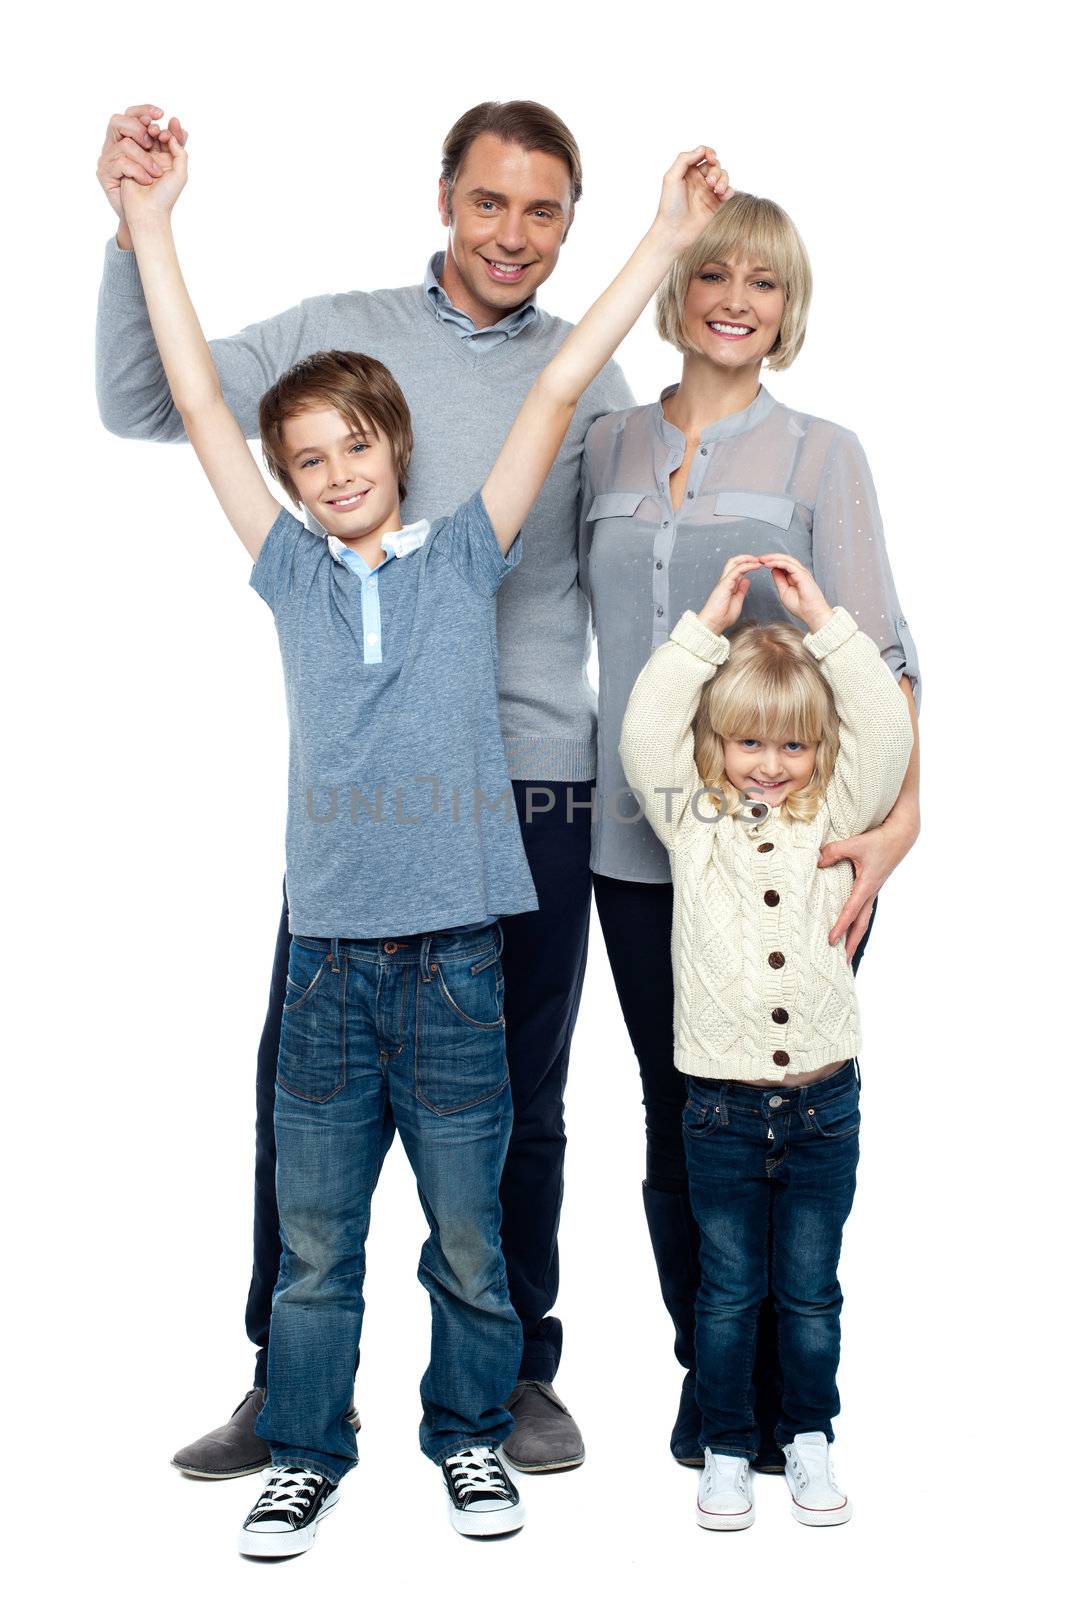 Playful kids with parents. Family portrait by stockyimages